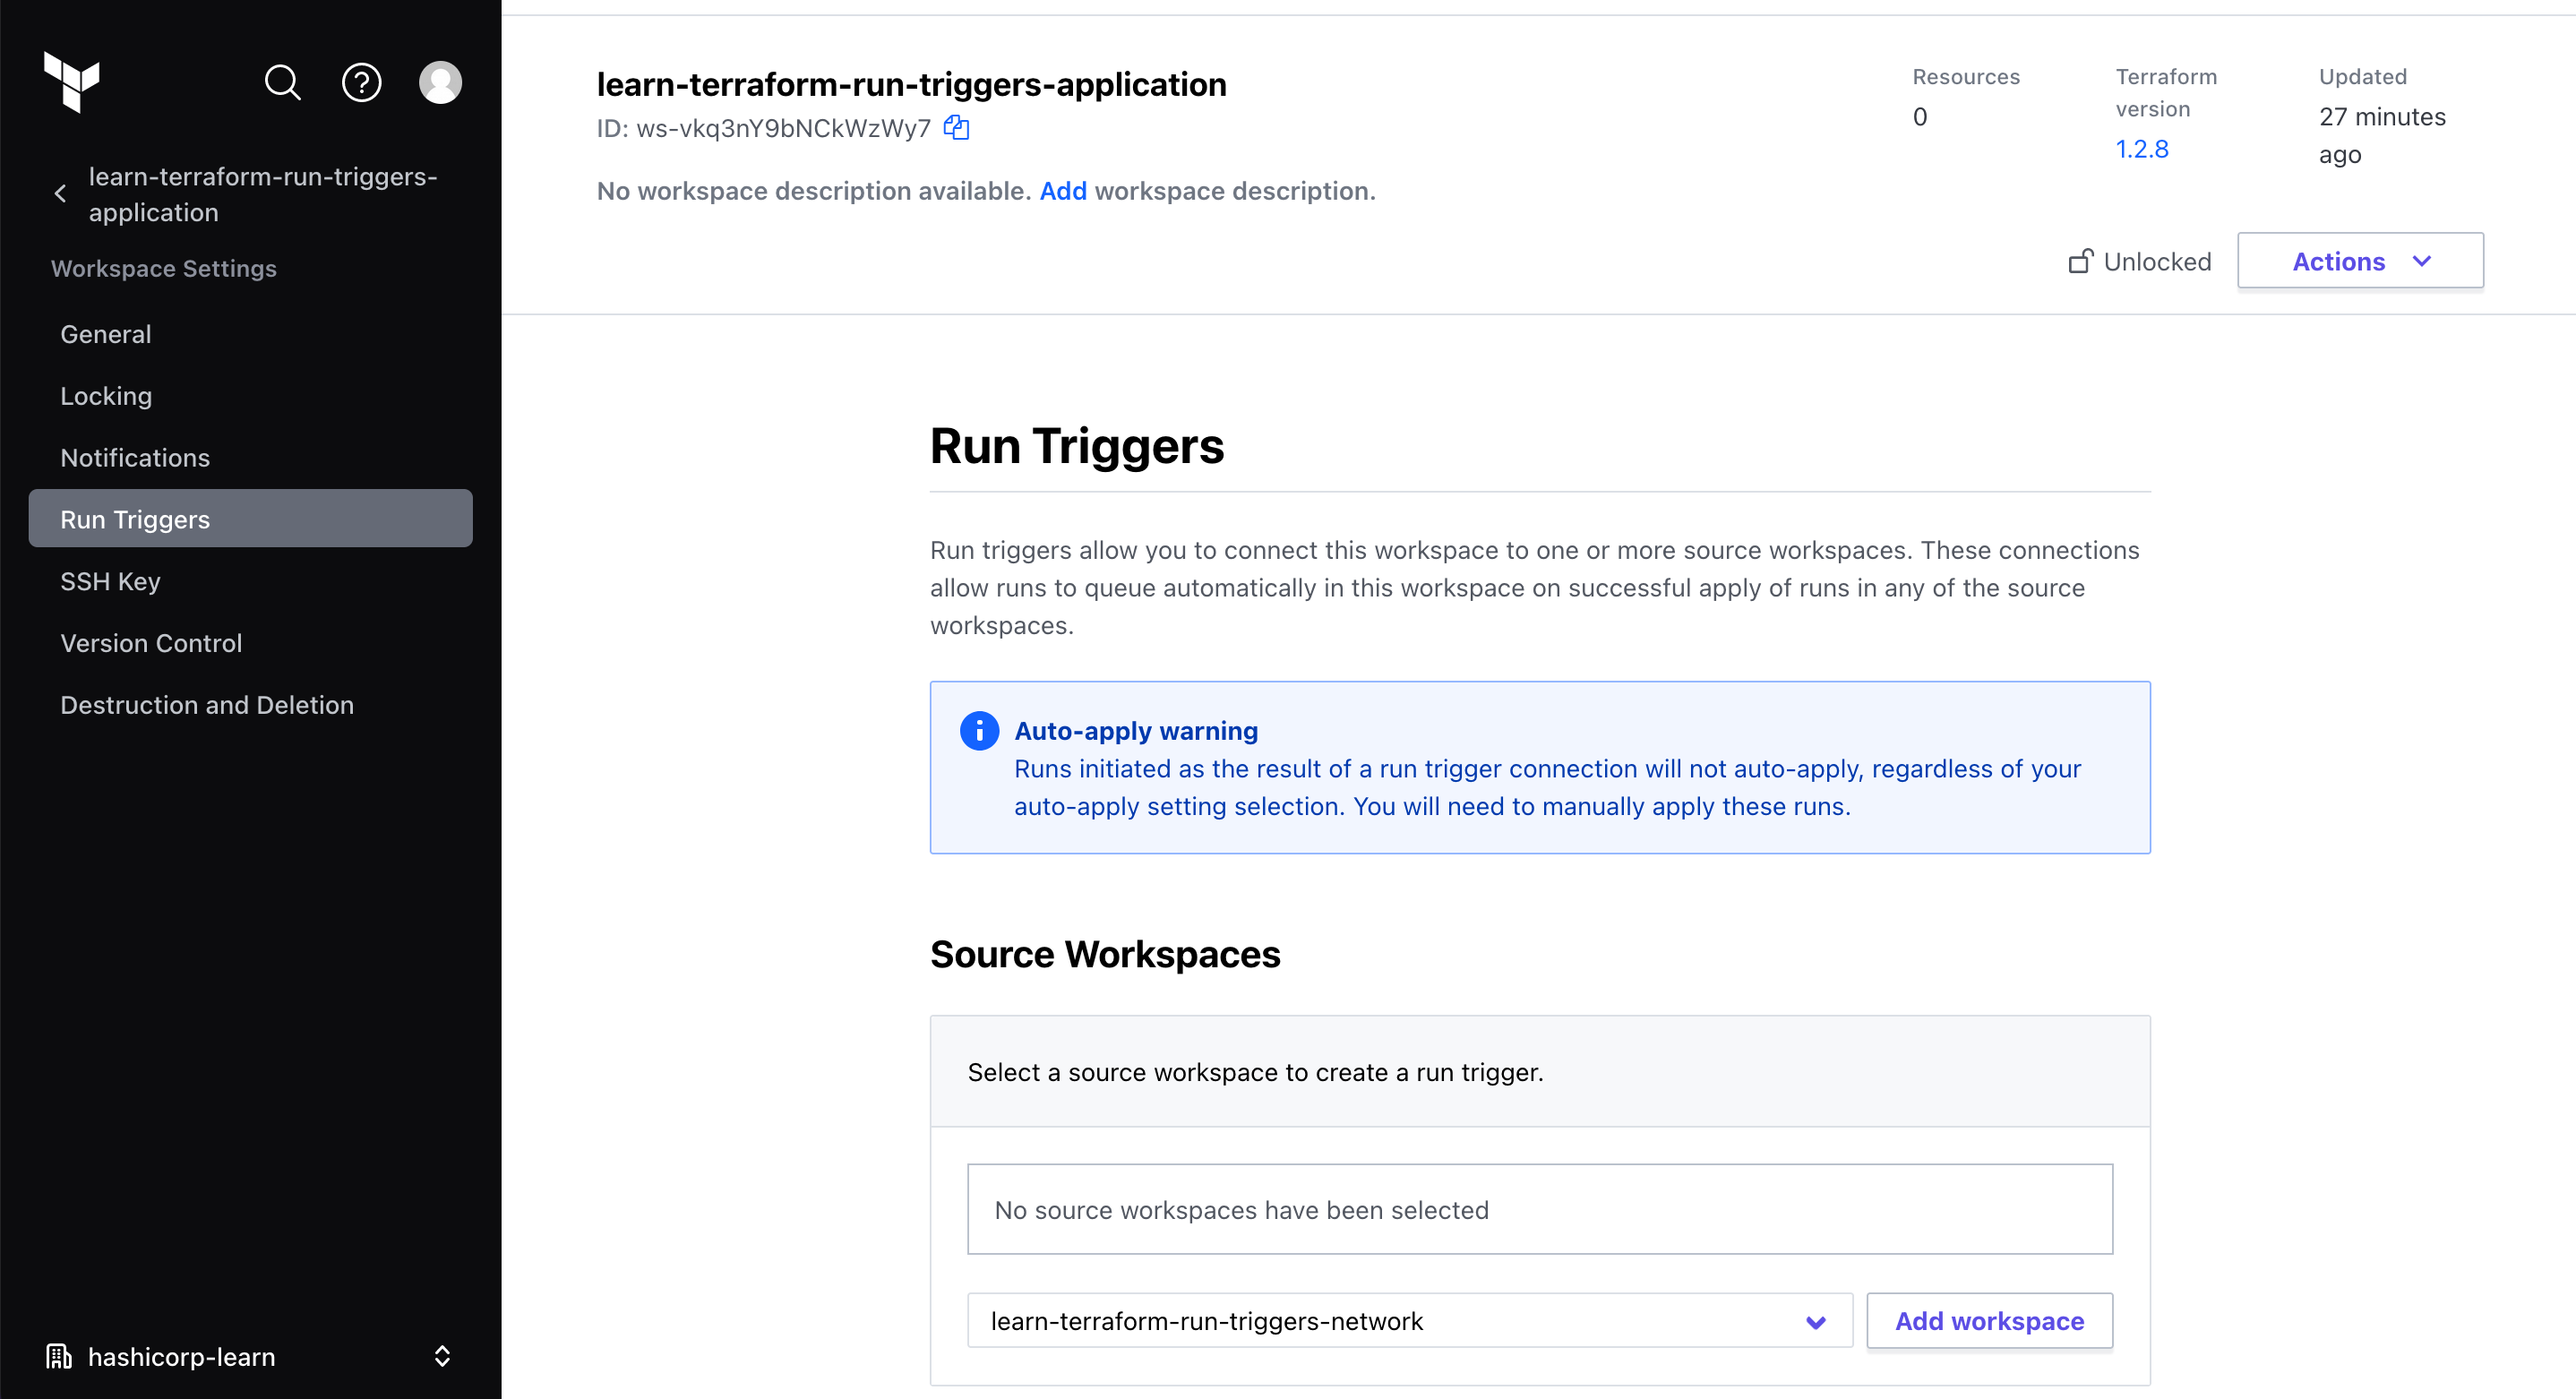 Configure a run trigger on the application workspace when the network workspace is deployed